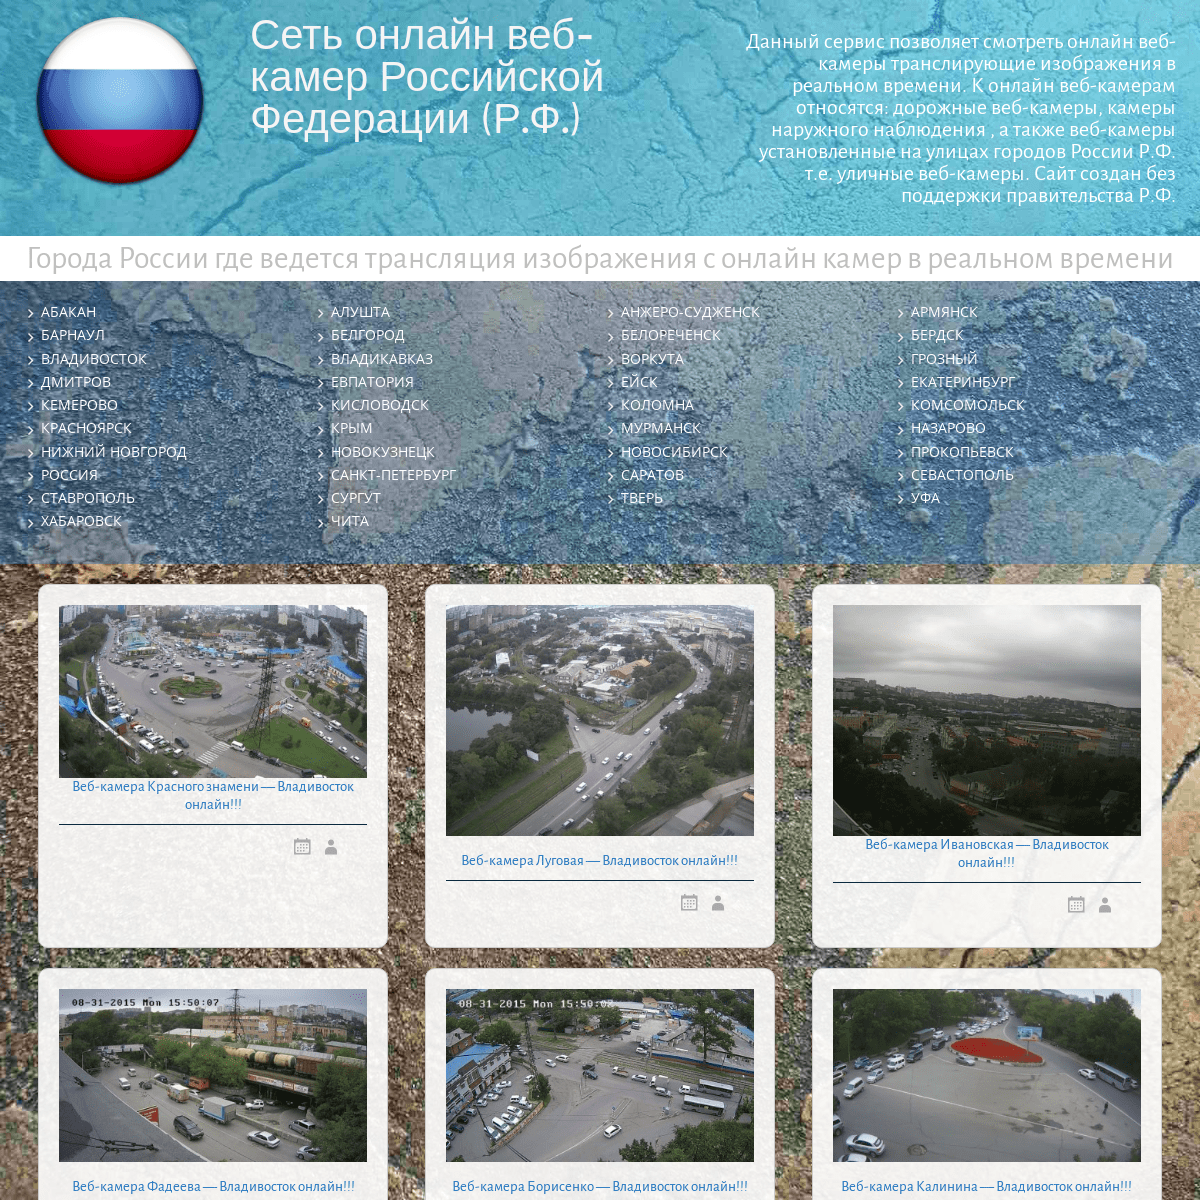 A complete backup of towncam.ru